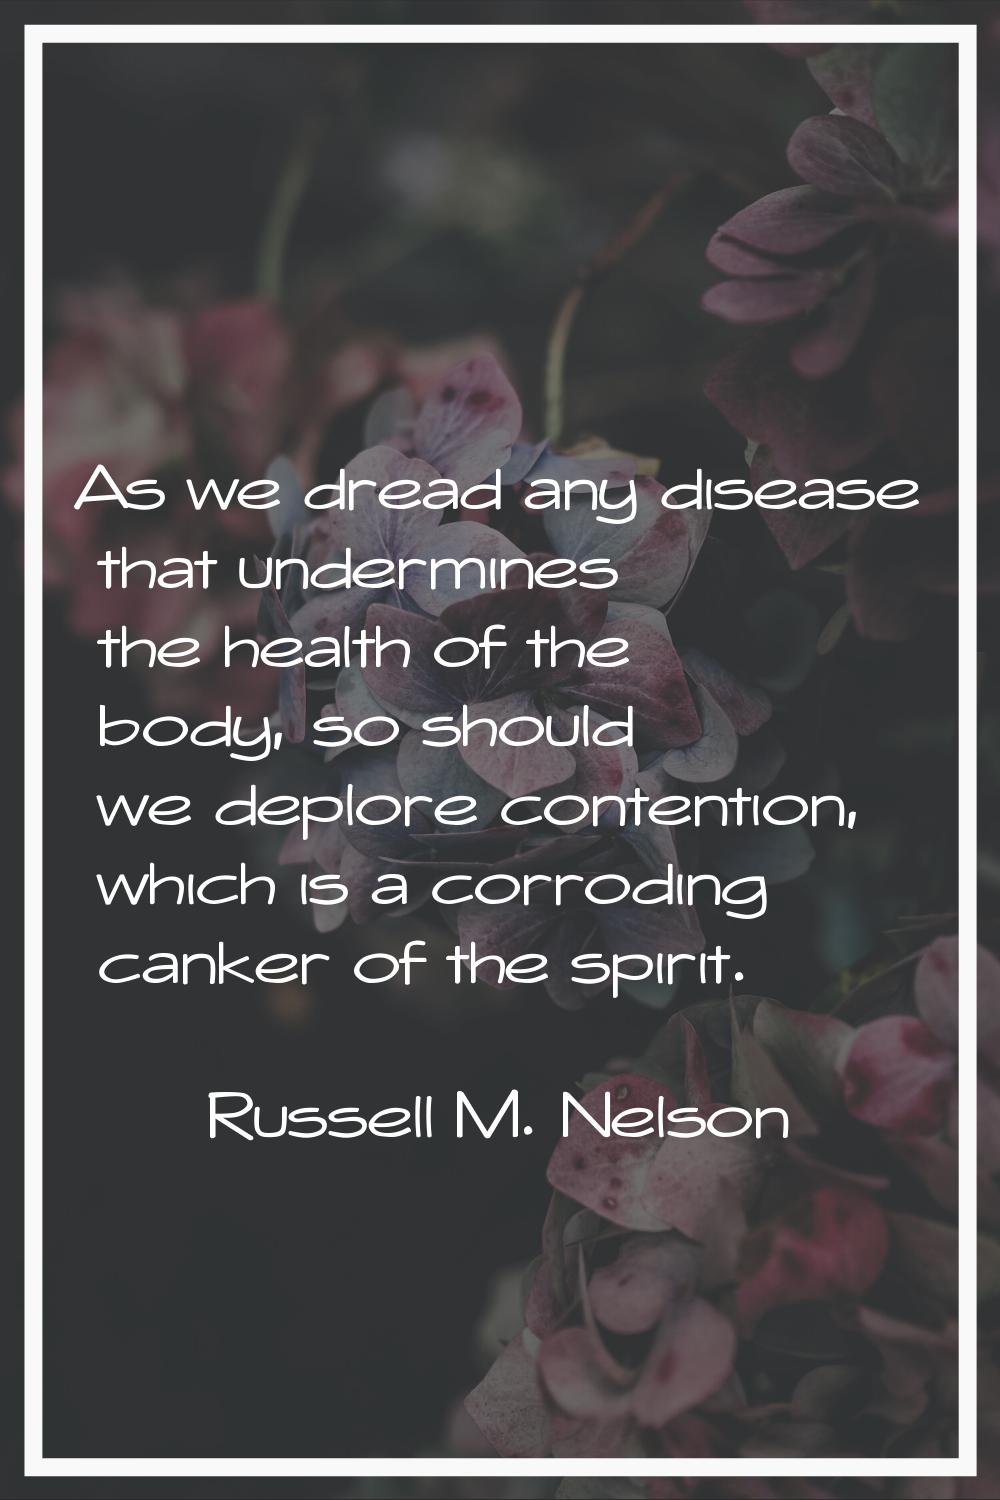 As we dread any disease that undermines the health of the body, so should we deplore contention, wh